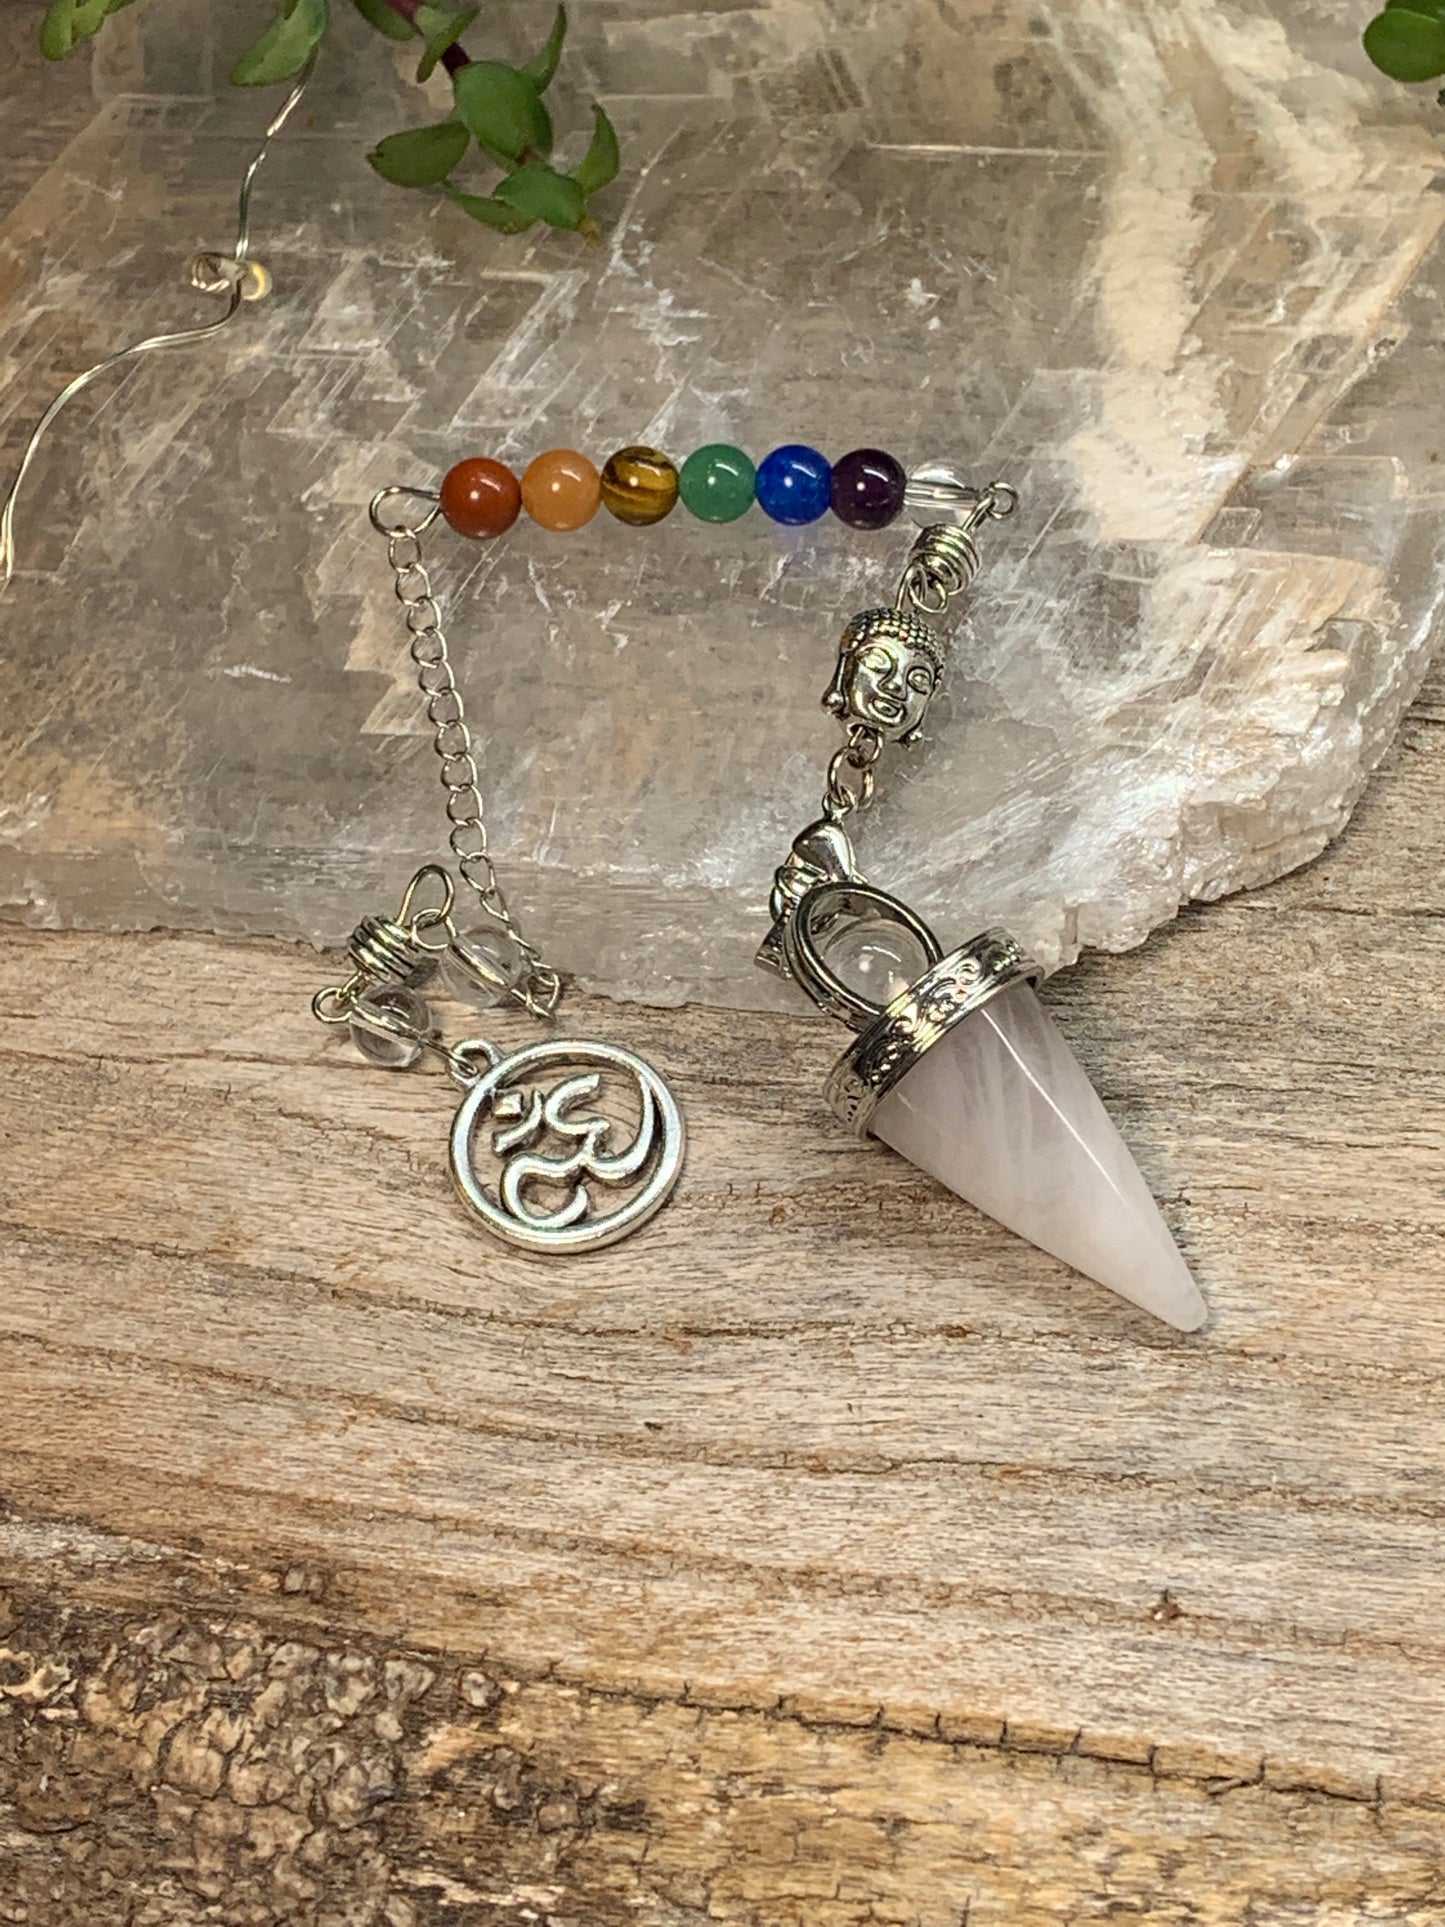 1 inch amethyst pendulum attatched to 8 inch chain including a silver crescent moon